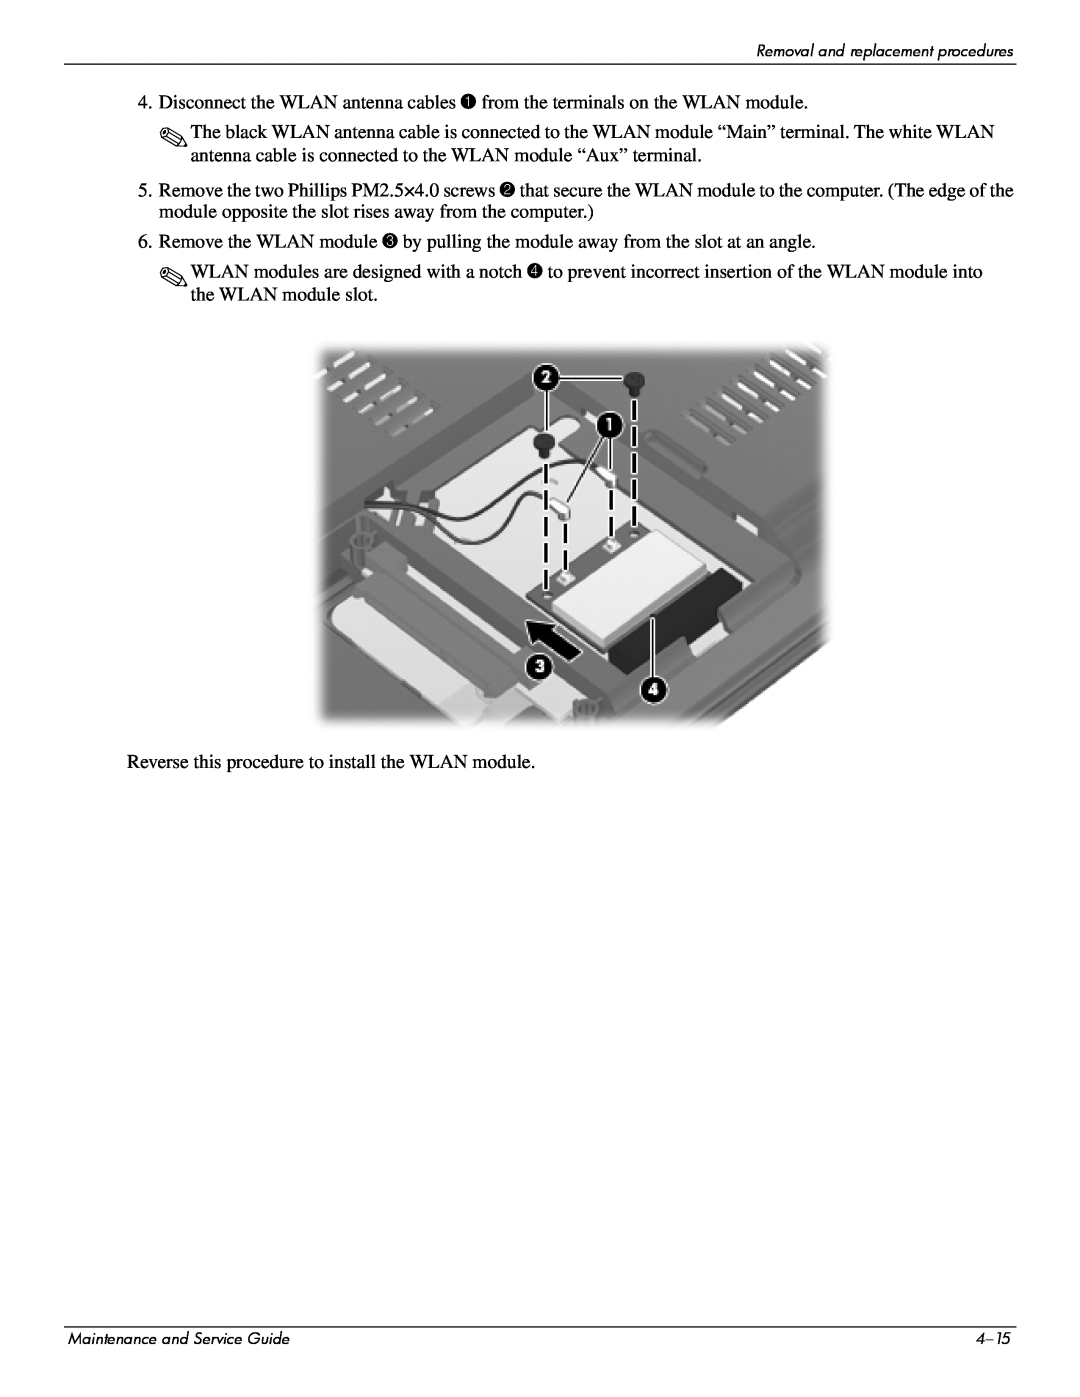 Compaq 510, 511, 515 manual Reverse this procedure to install the WLAN module 